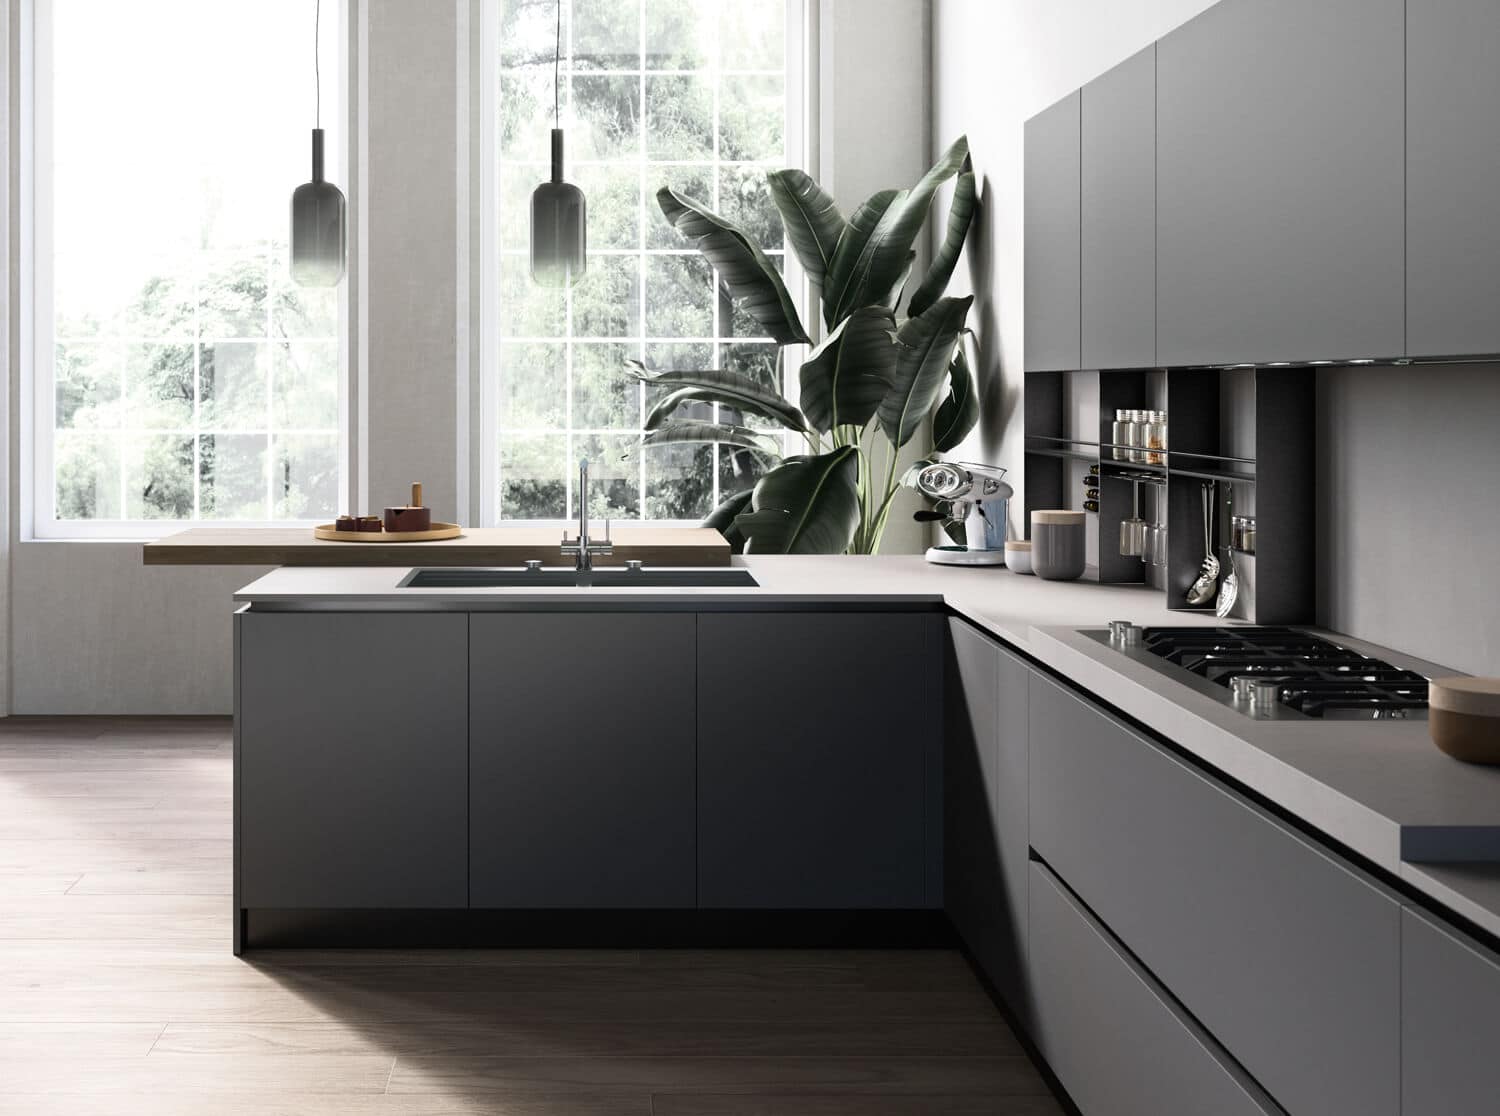 The minimalist lines of Kappa's handle-free kitchen cabinets with integrated channel.